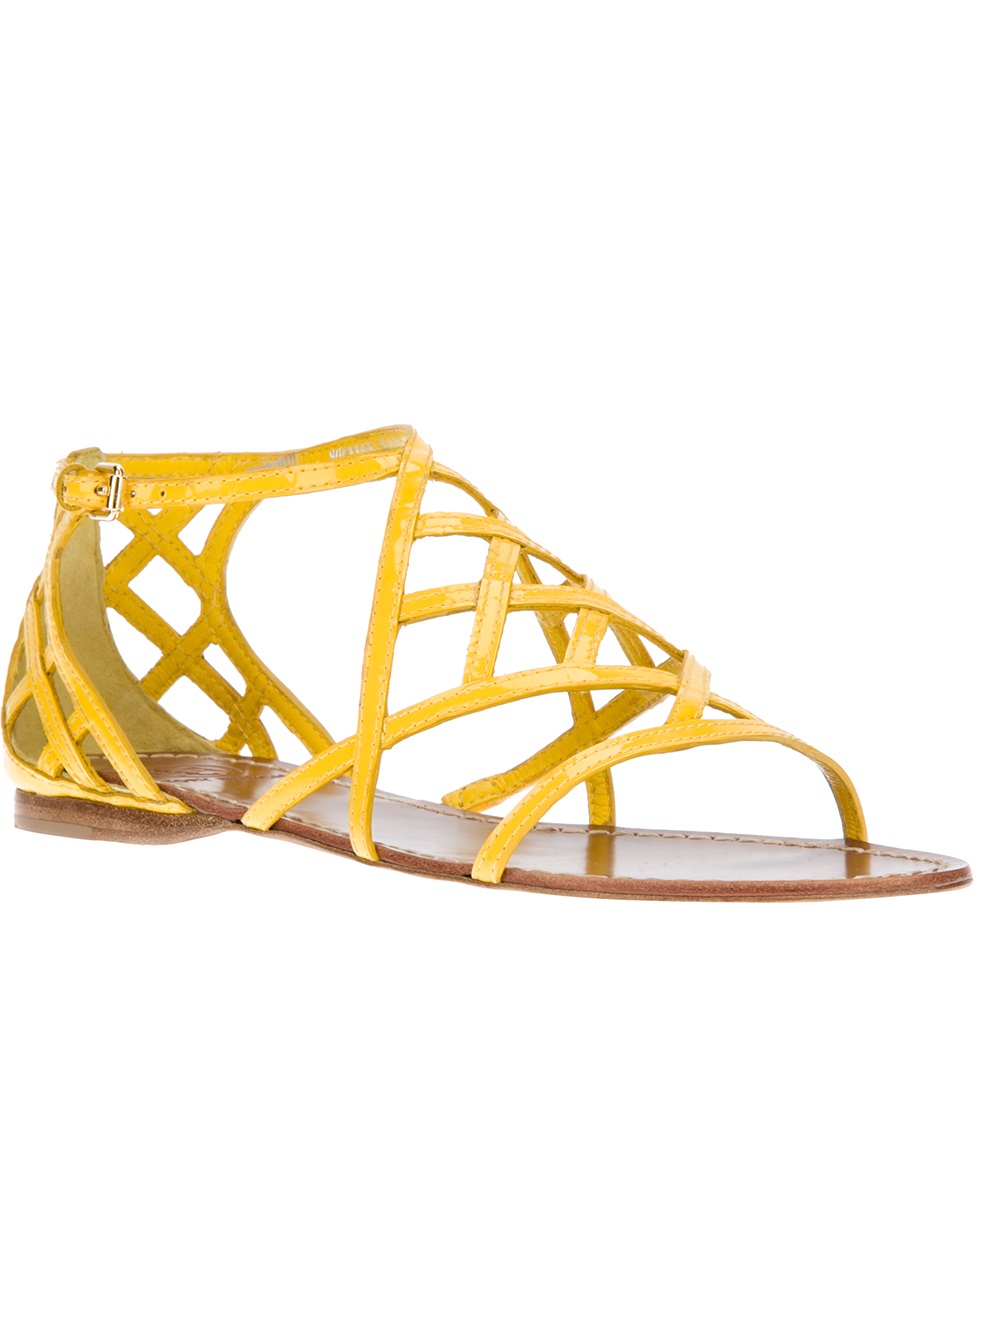 Tory burch Strappy Flat Sandal in Yellow | Lyst